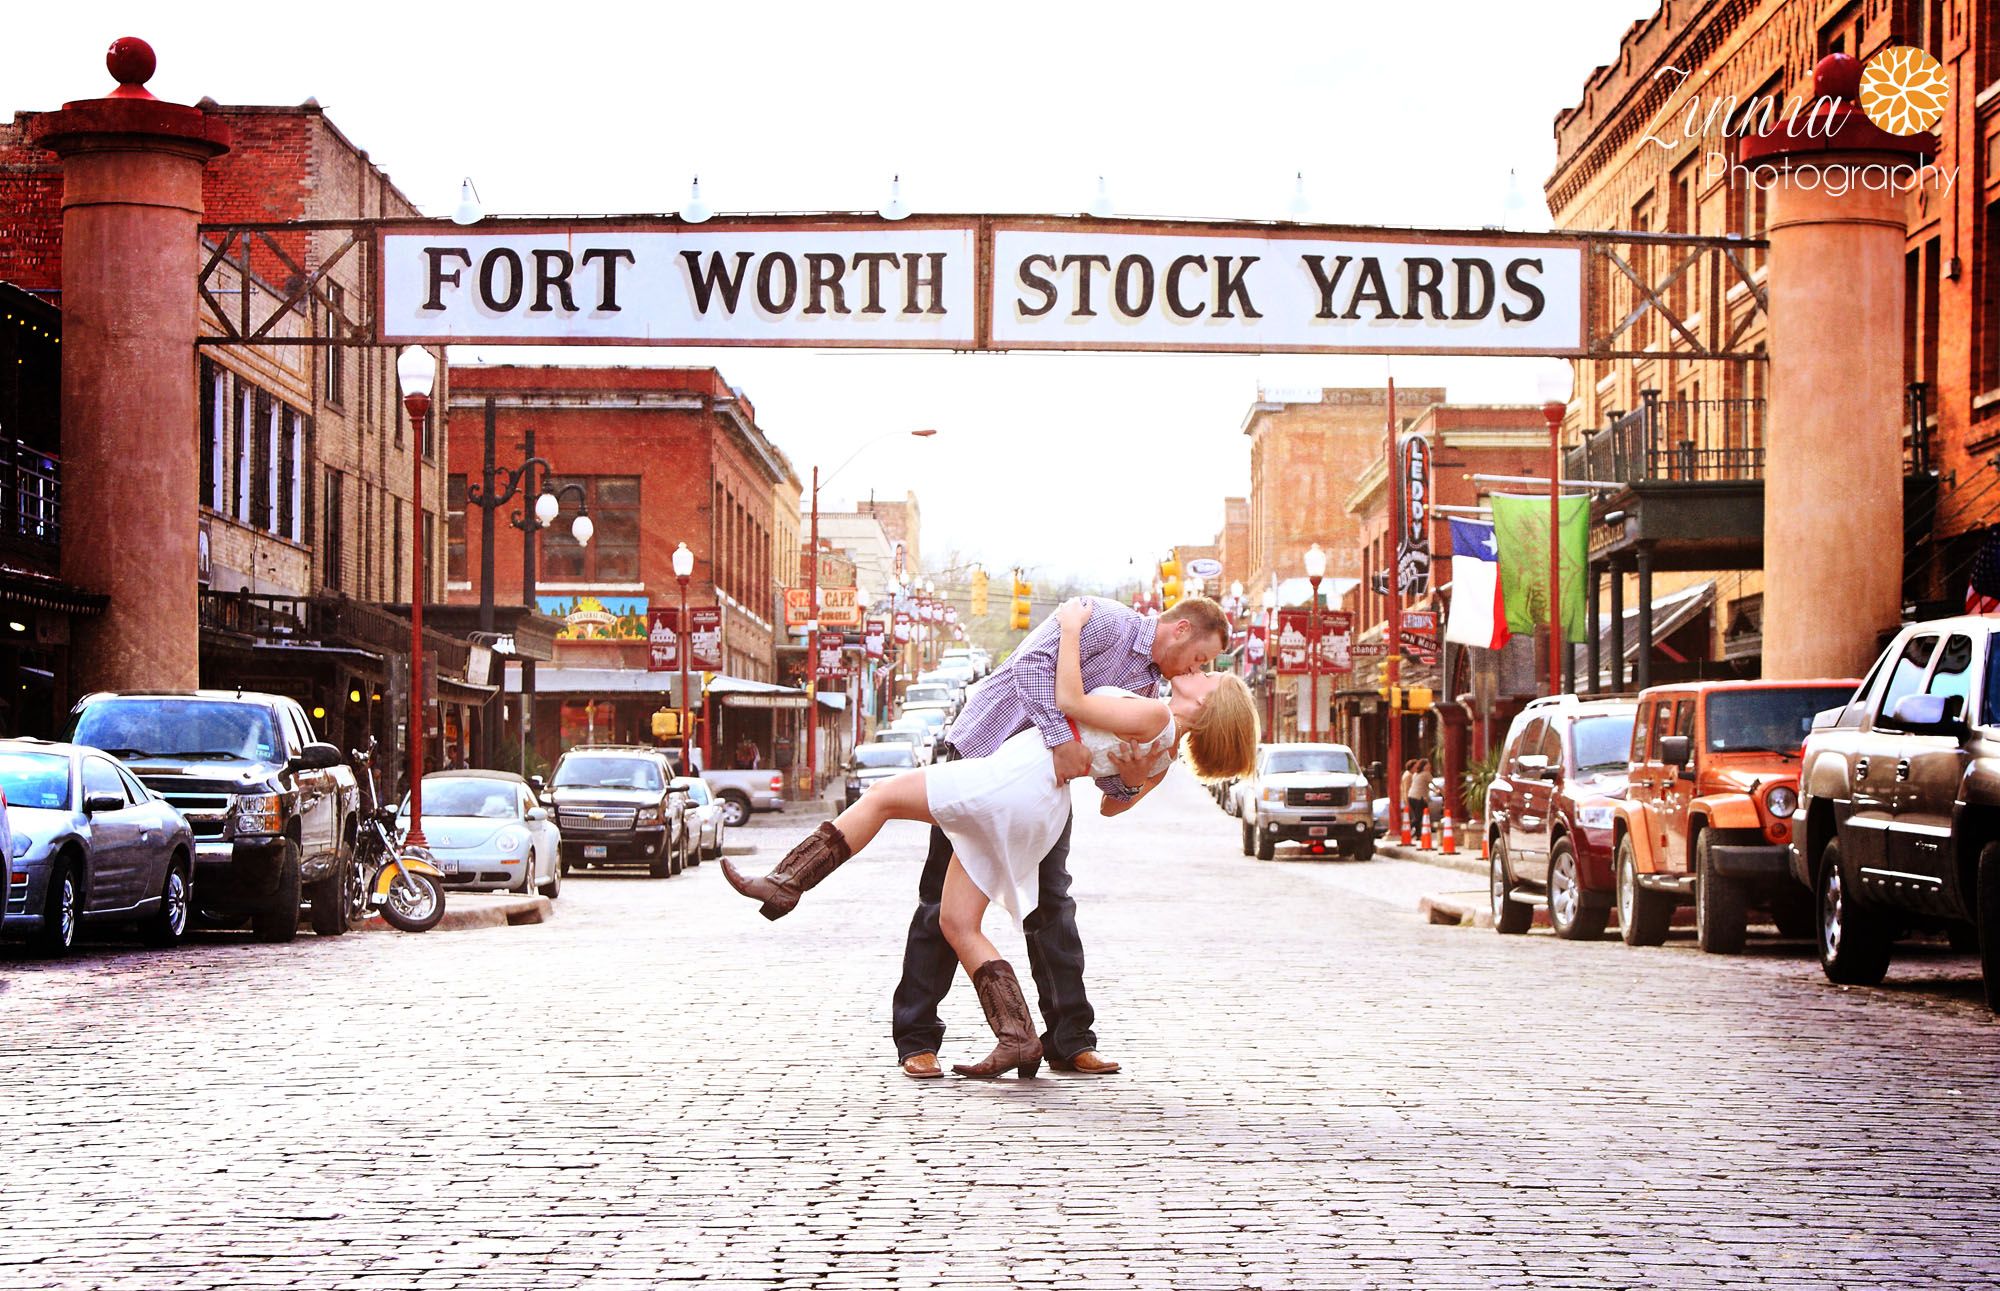 Fort Worth Stockyards Engagement Session zinniaphotography.com ...